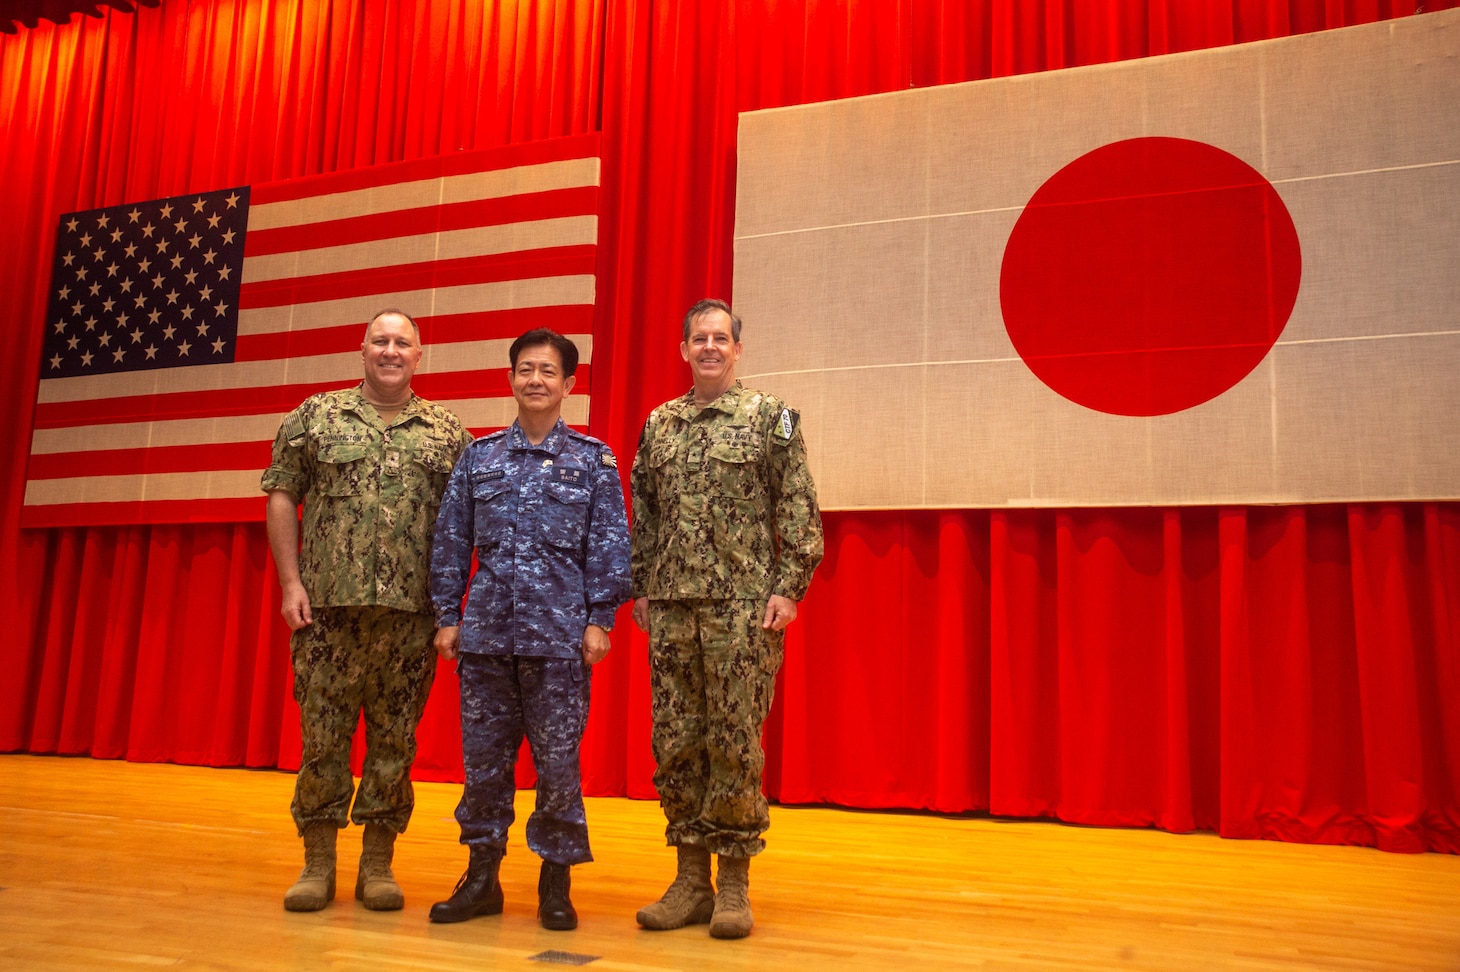 YOKOSUKA, Japan (Oct. 21, 2021) Rear Adm. Michael Donnelly, Commander, Task Force (CTF) 70, right, poses for a photo with Vice Adm. SAITO Akira, commander of Japan Maritime Self-Defense Force (JMSDF) Fleet Escort Force and Rear Adm. Will Pennington following a change of command ceremony for CTF 70 in the Benny Decker Theater on Yokosuka Naval Base, Oct. 21. (U.S. Navy photo by Mass Communication Specialist 3rd Class Askia Collins)